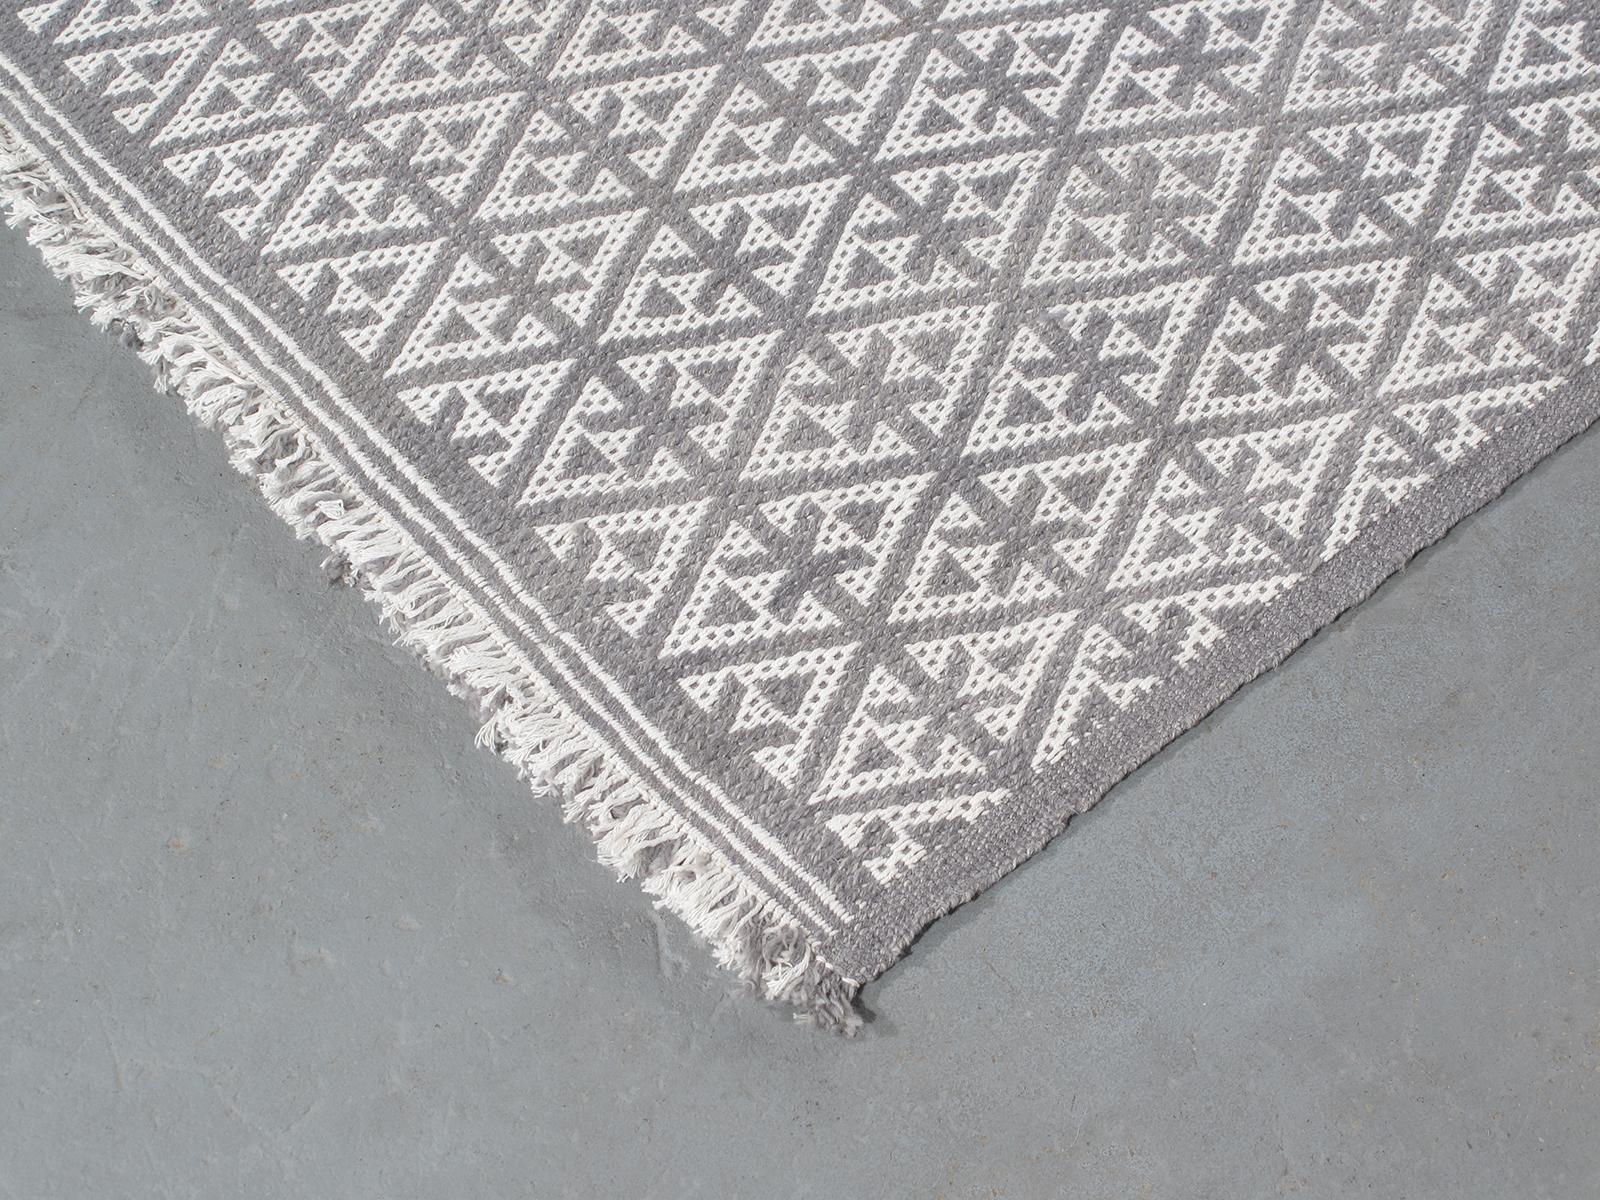 Hand-Woven Decorative Handwoven Flat-Weave Runner Rug in Grey and Ivory Color For Sale